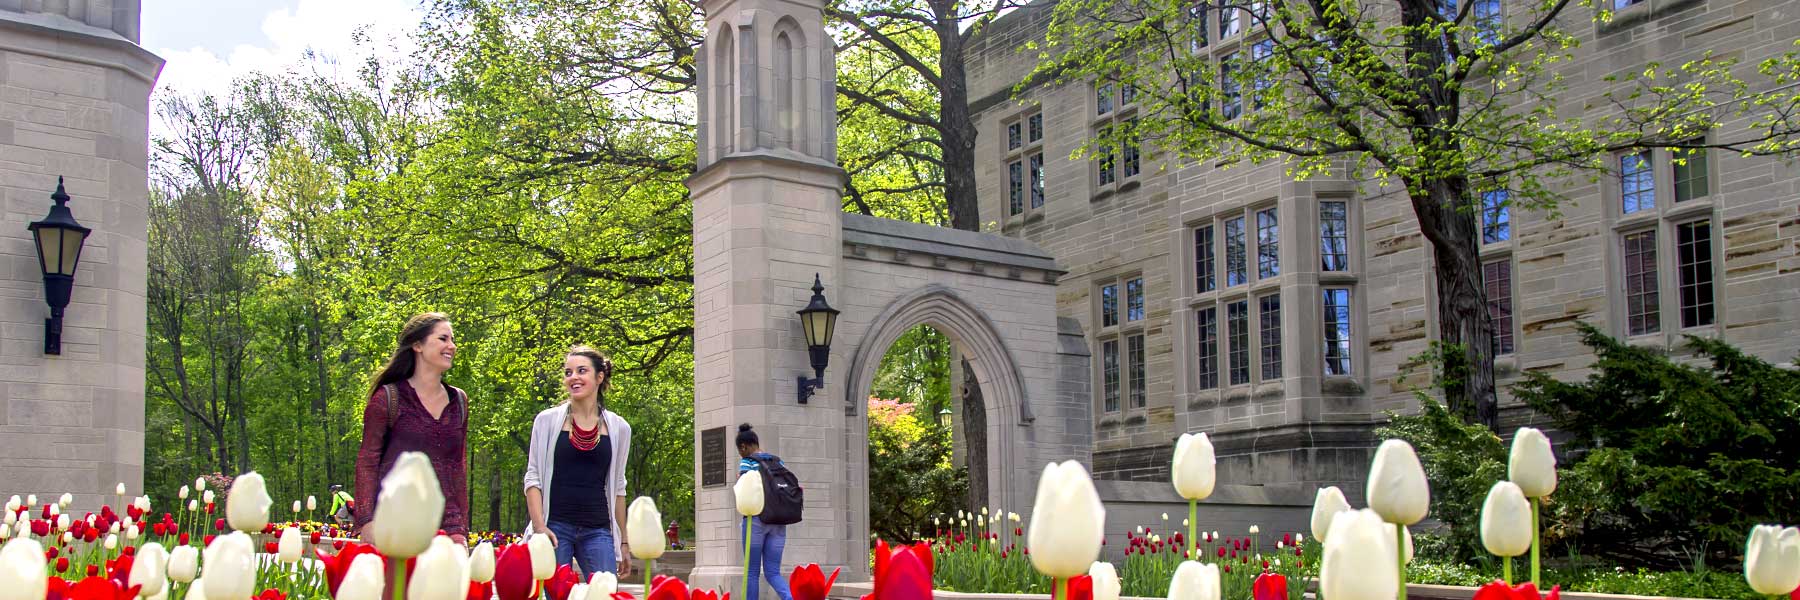 Students walk through the main gates of campus